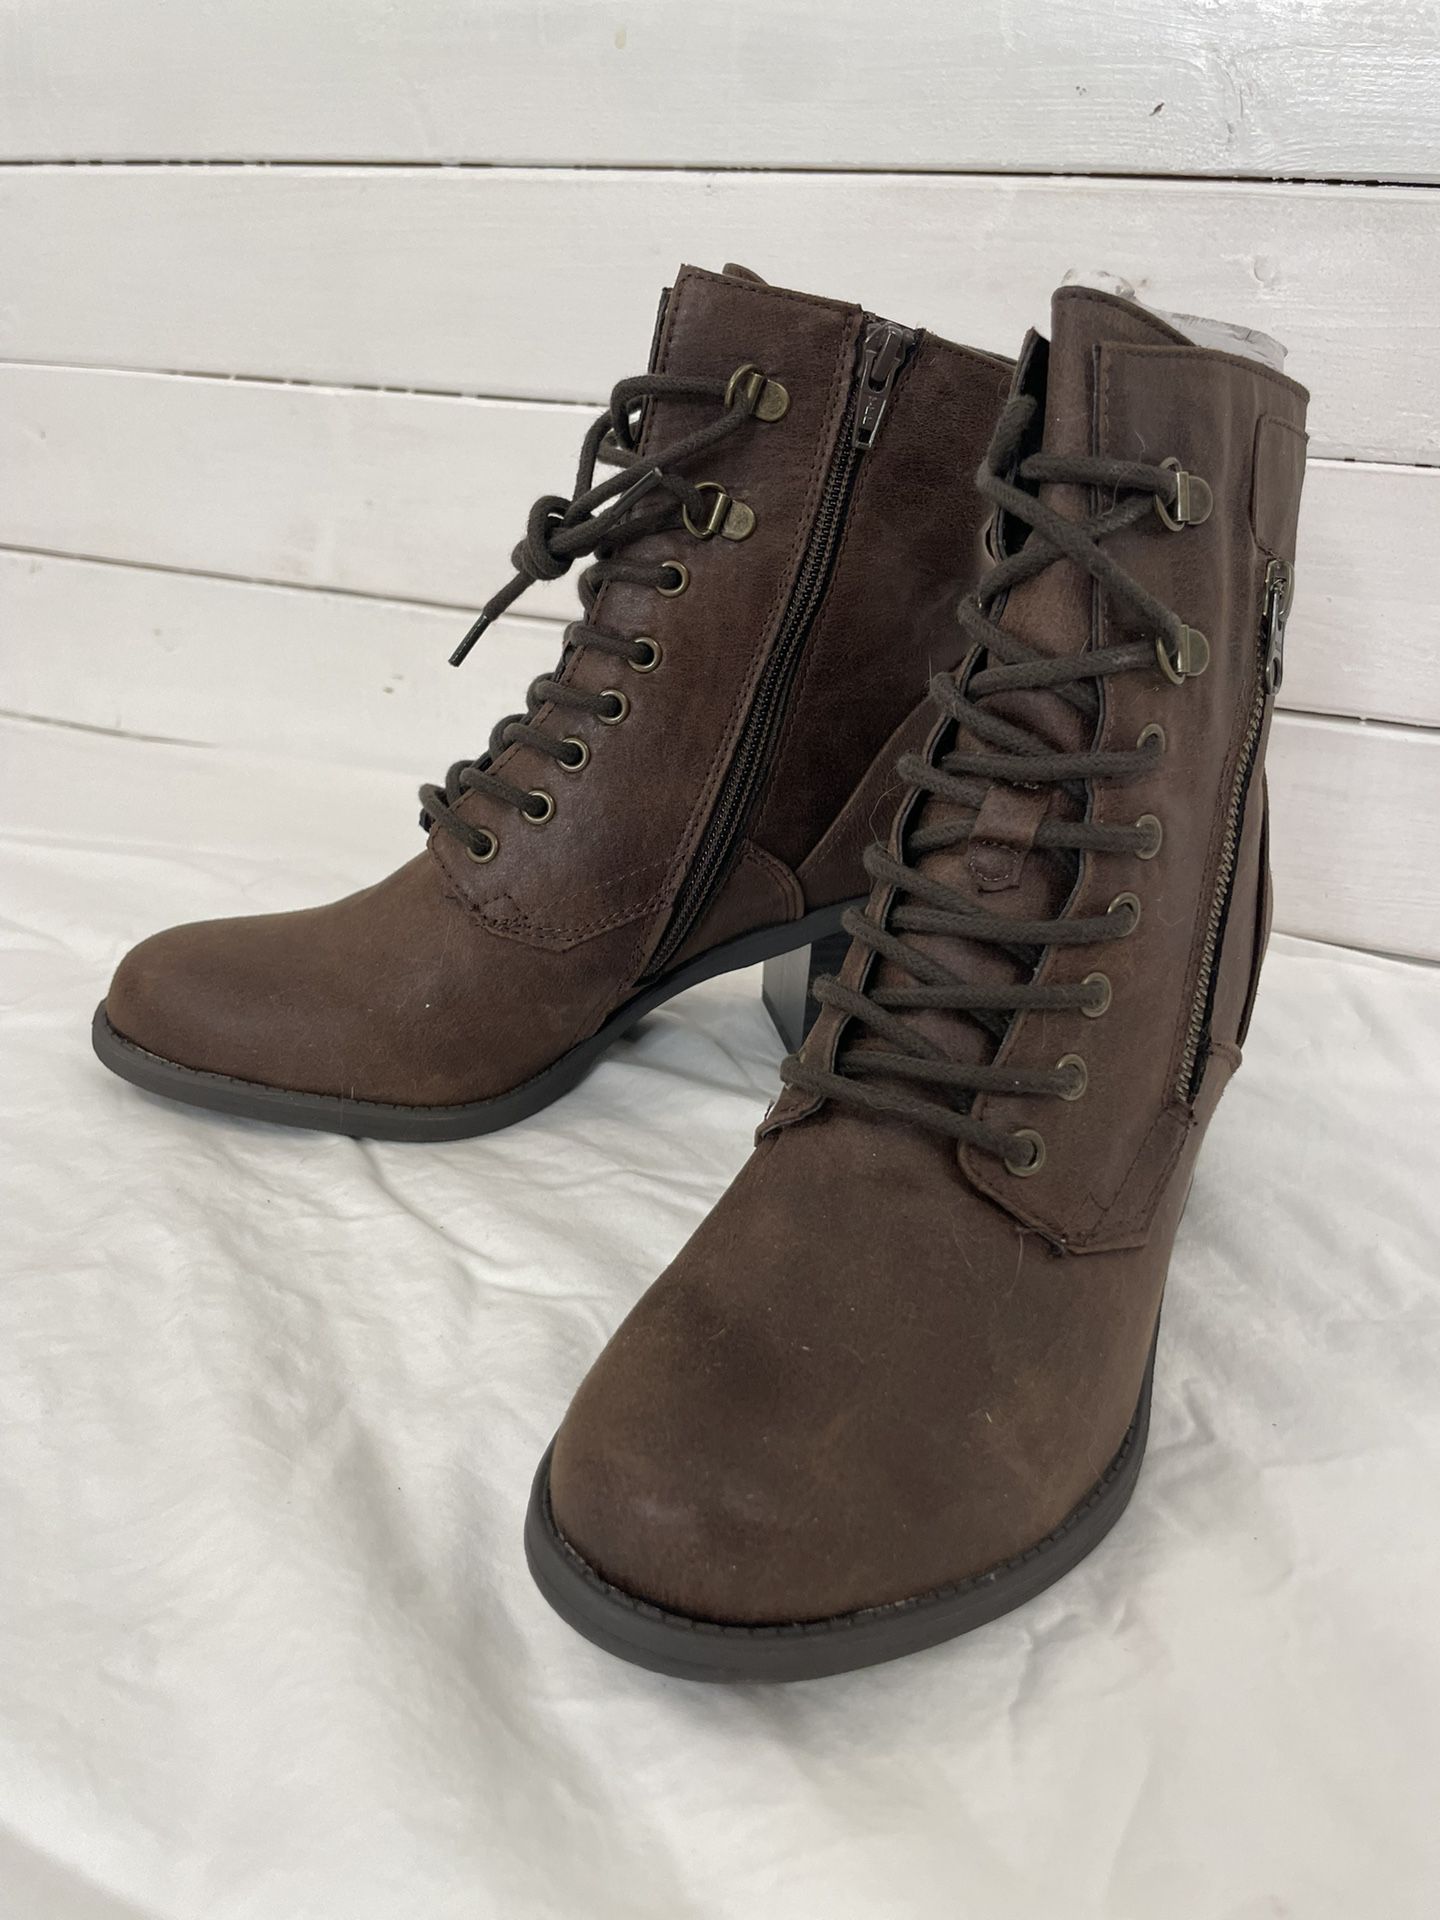 NEVER WORN Brown boots Women’s Size 8M, Ankle-High, Block Heel, Synthetic Leather 